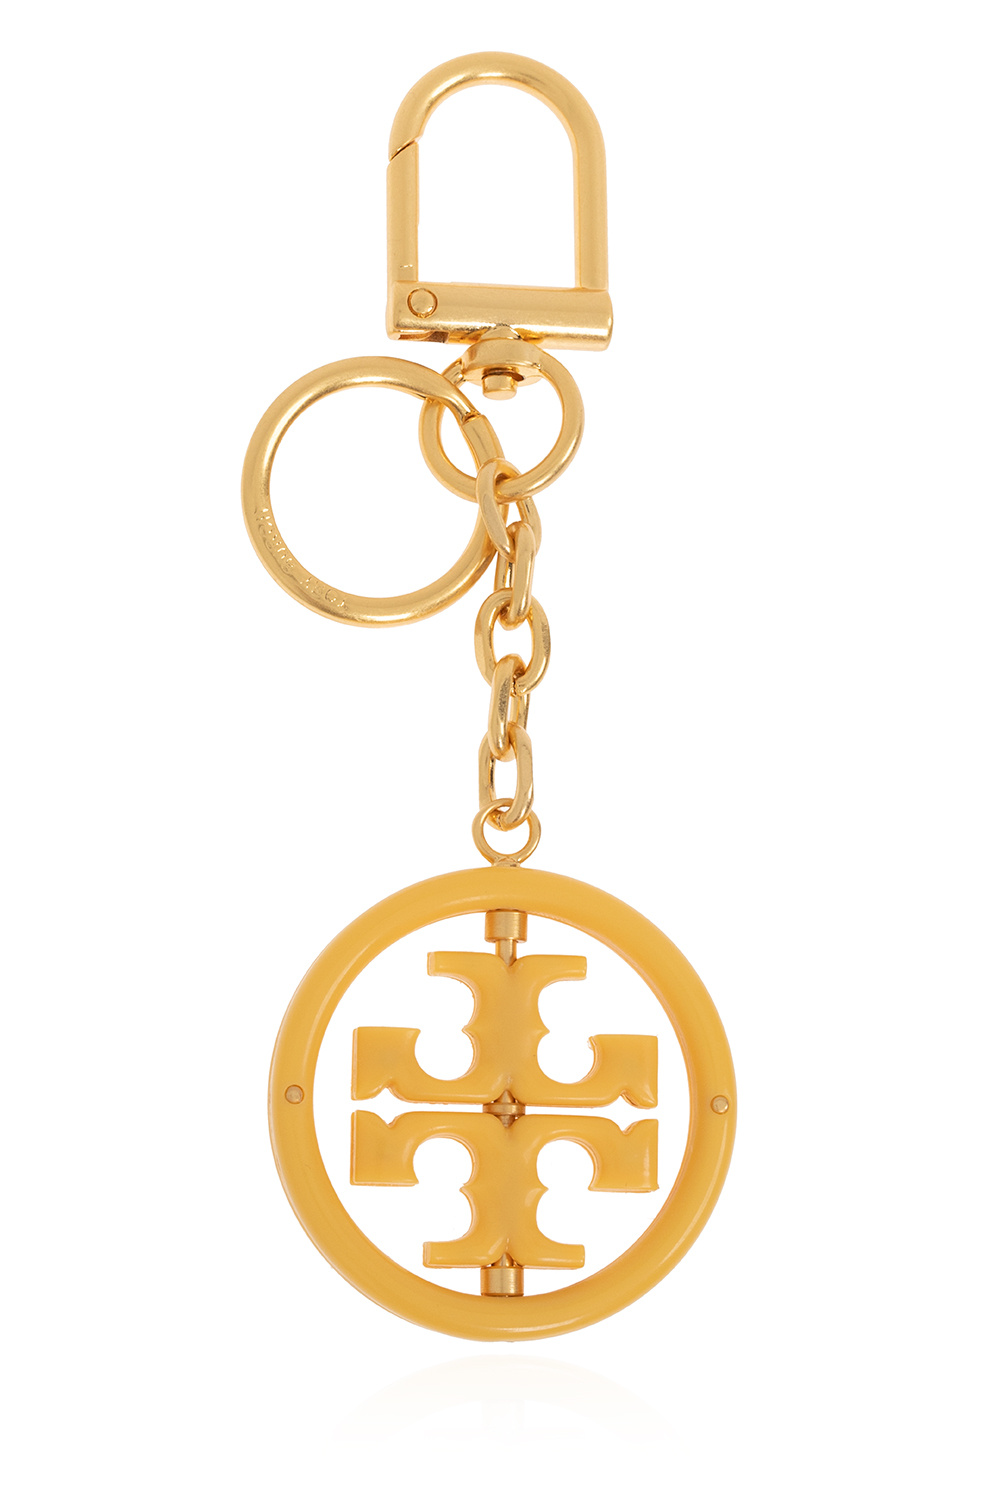 Tory Burch Keyring with rotating elements